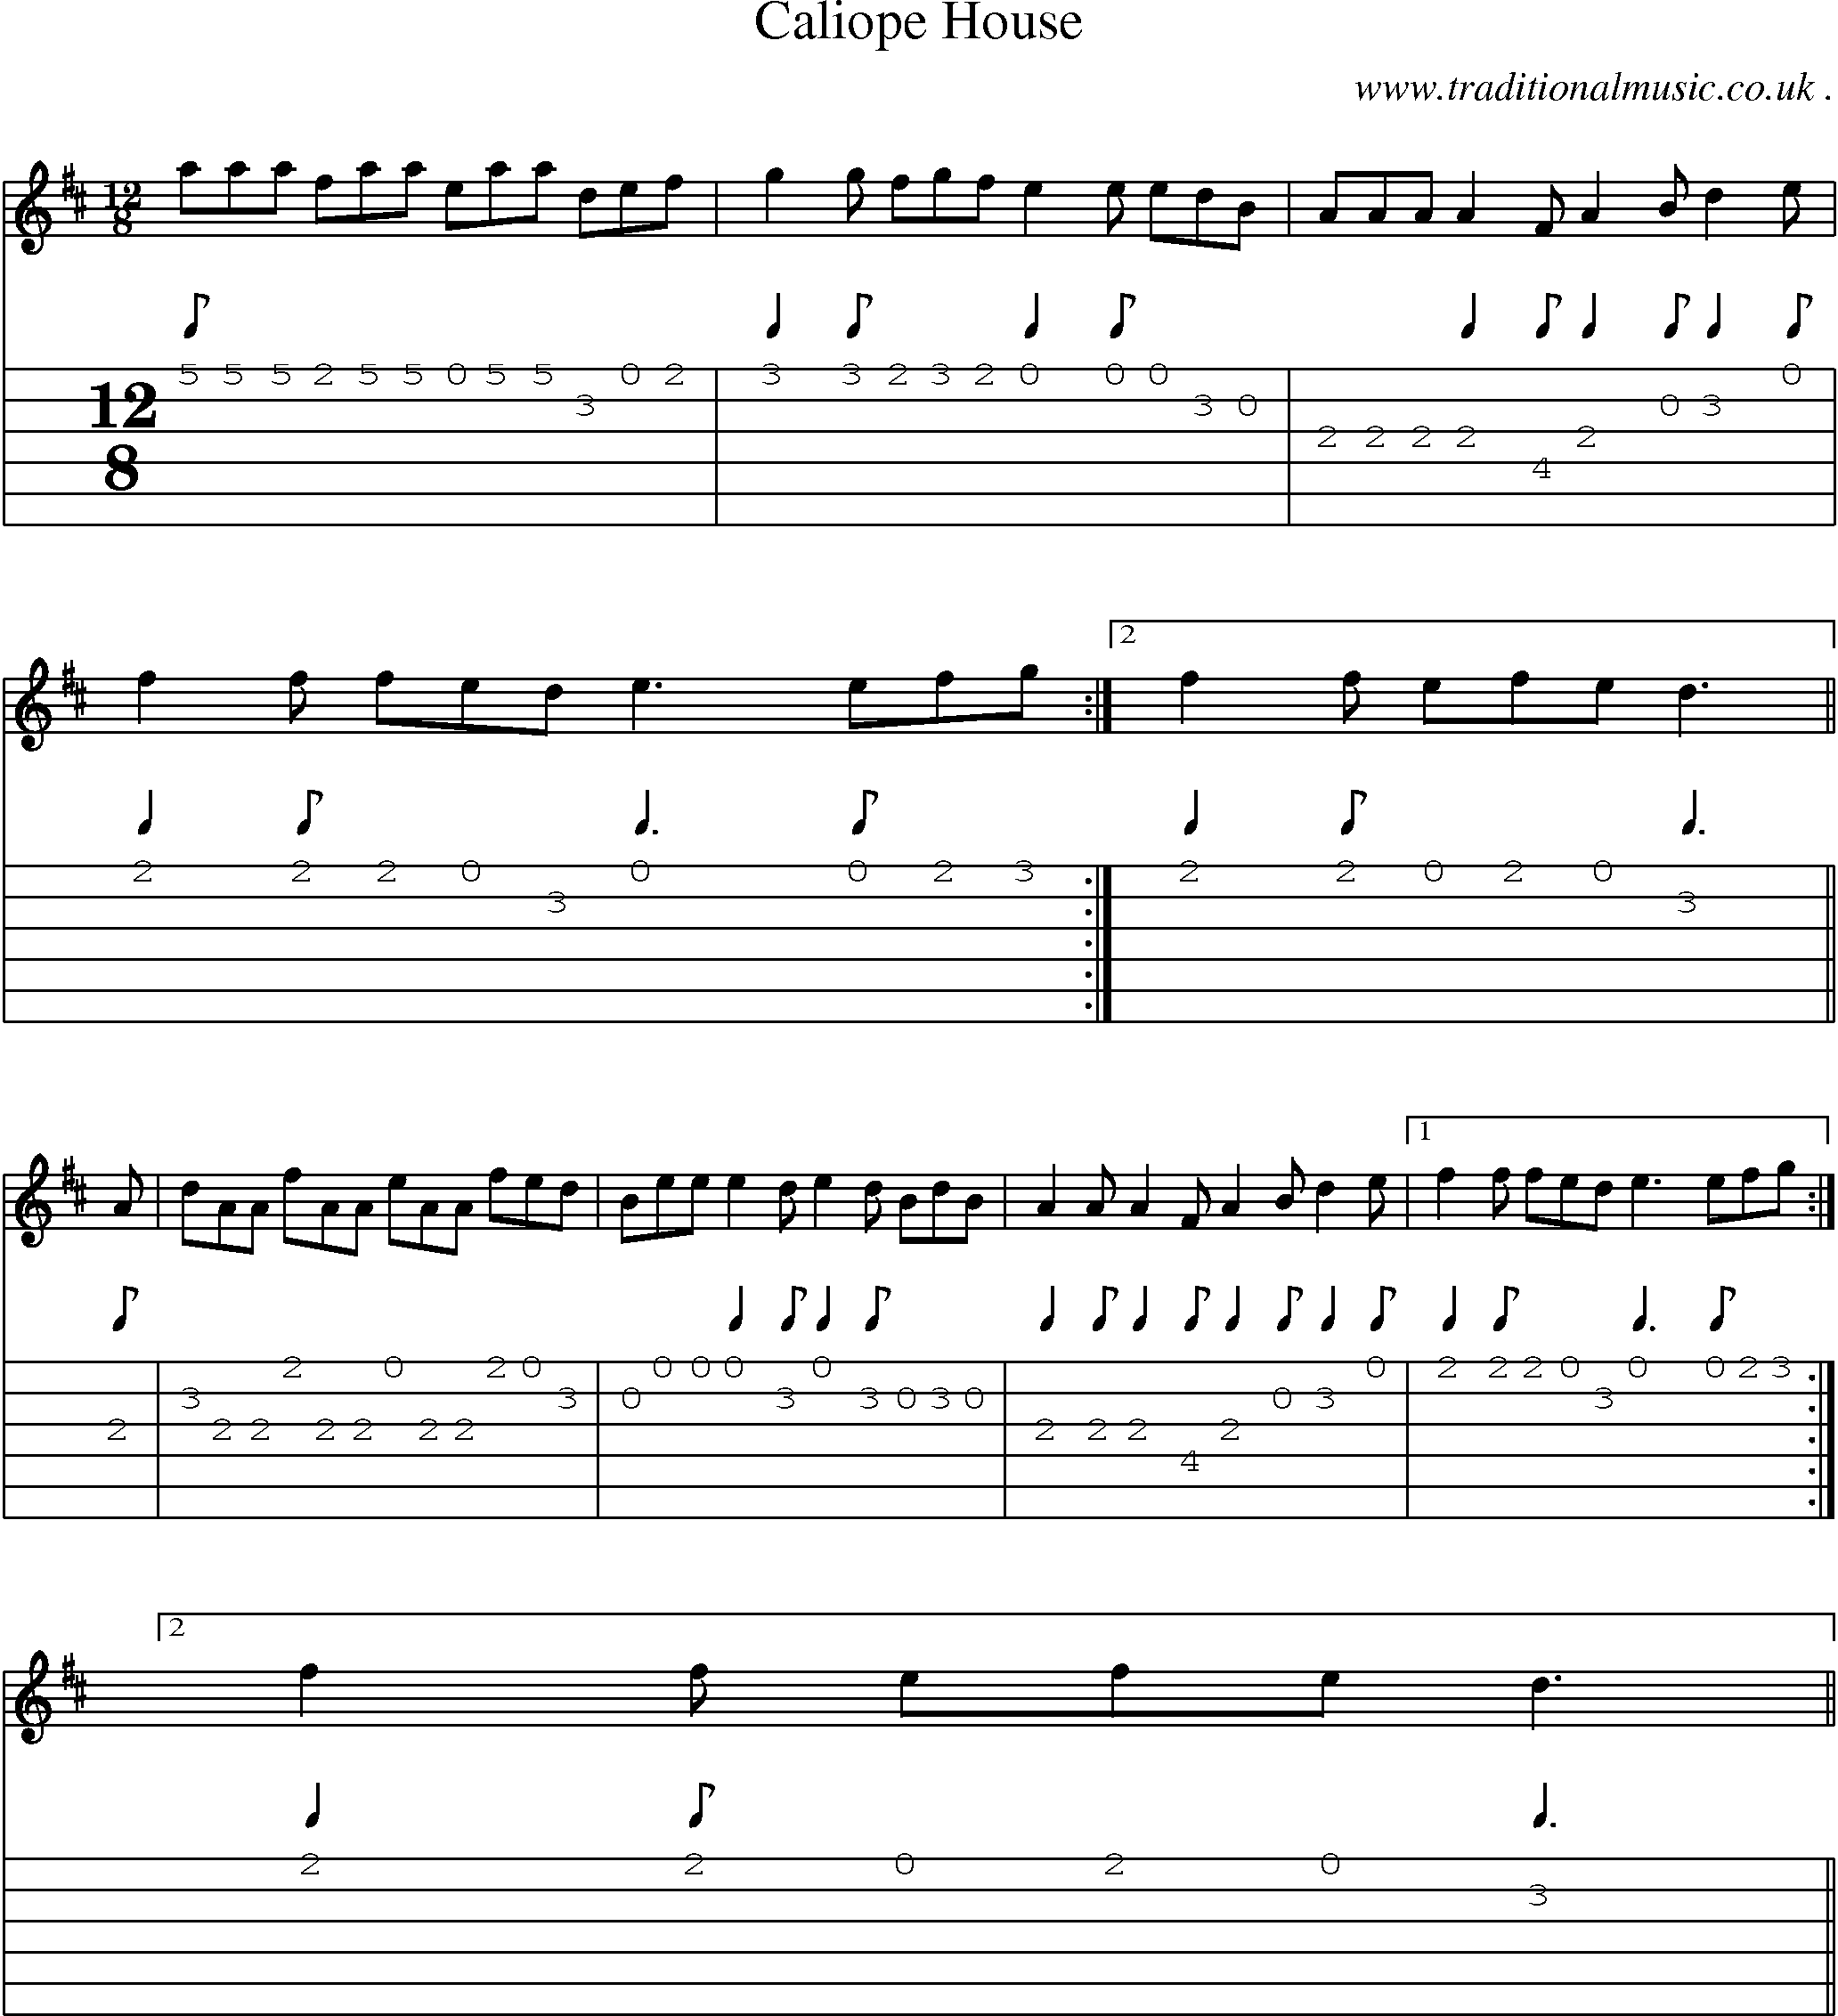 Sheet-Music and Guitar Tabs for Caliope House